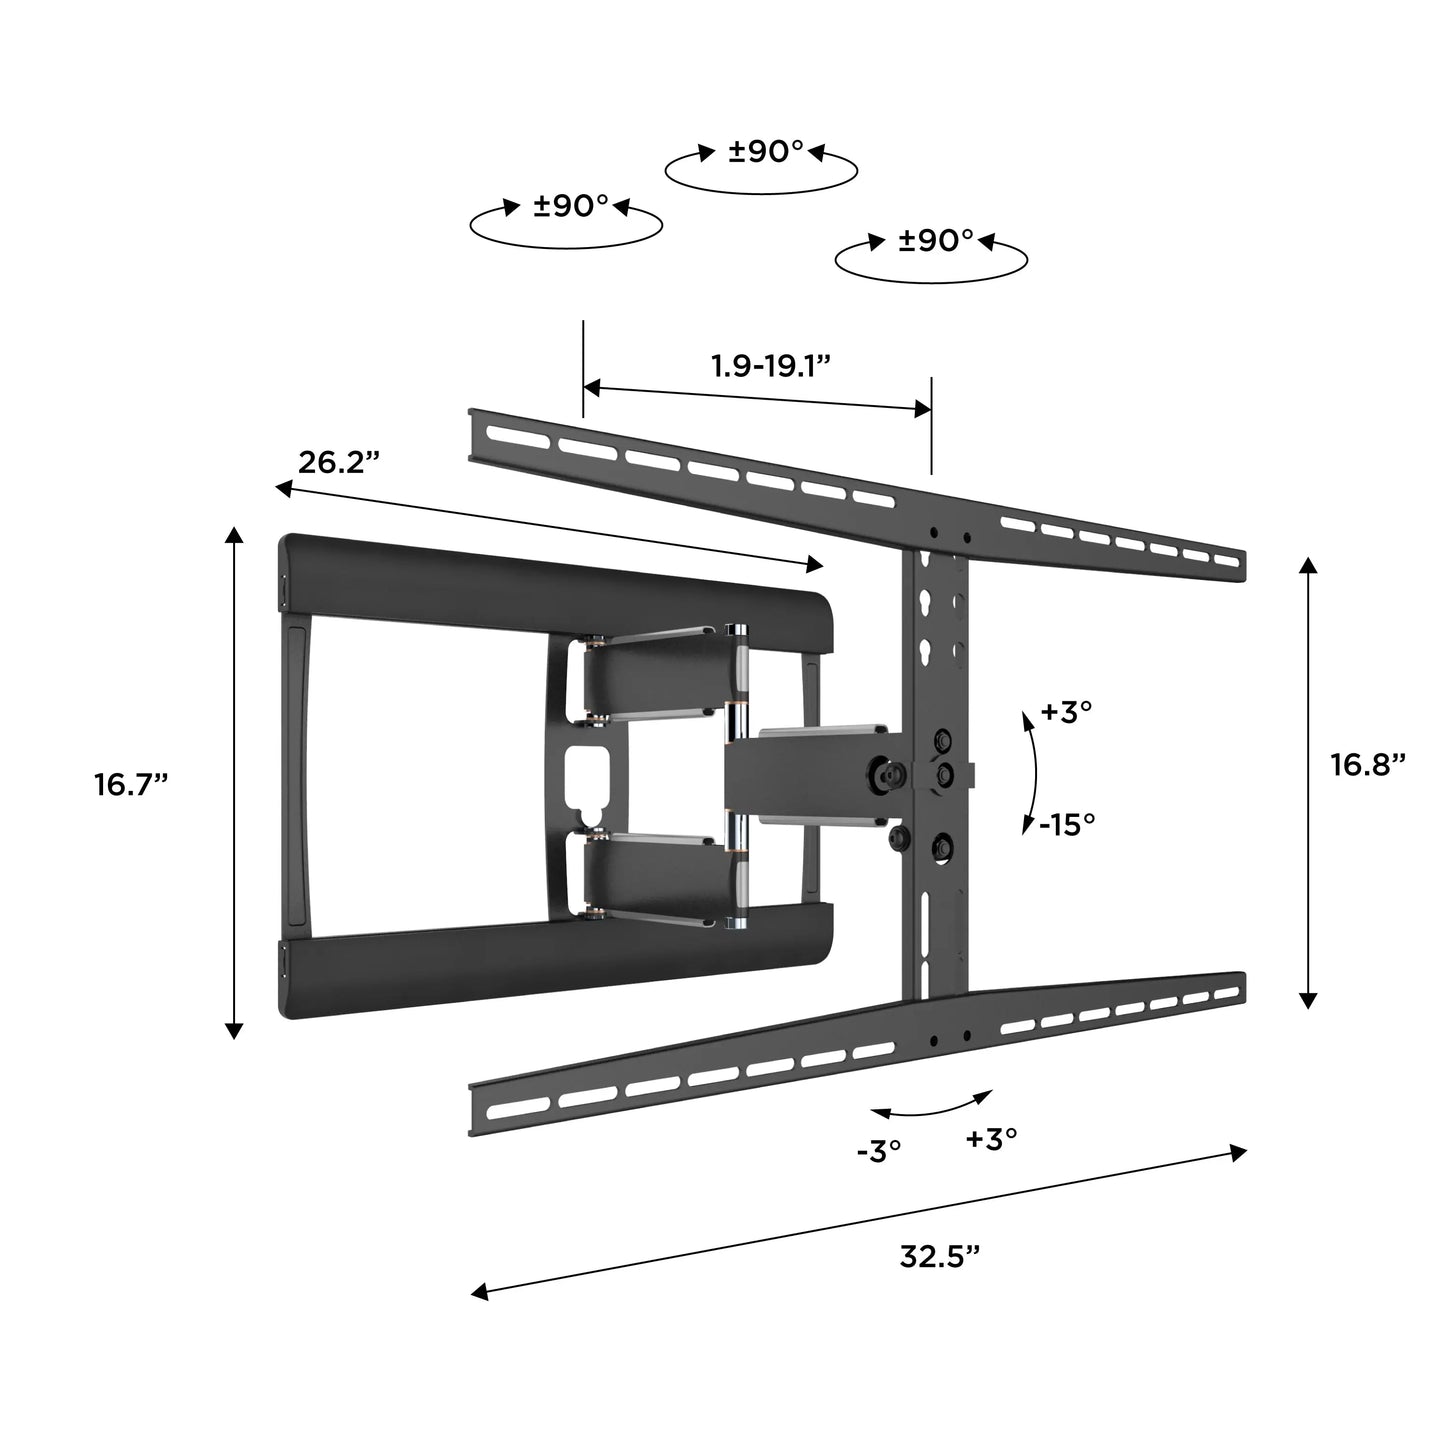 ProMounts Articulating / Full-Motion TV Wall Mount for 37" to 85" TVs up to 120 lbs (SAL)